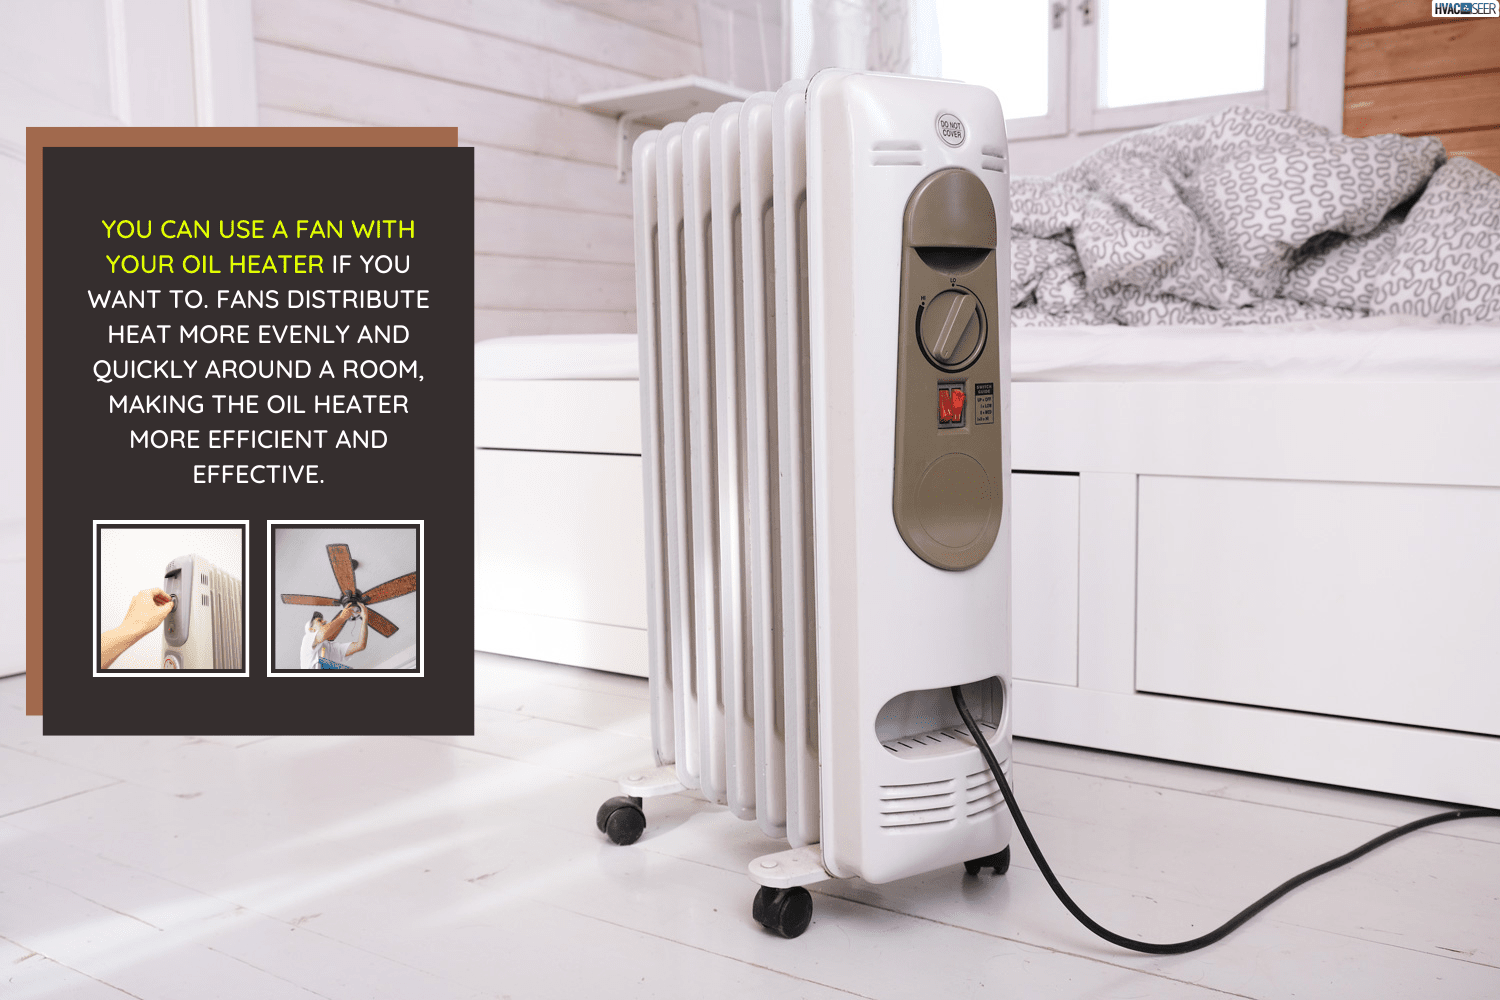 Oil-filled electrical mobile radiator heater for home heating and comfort control in the room in a wooden country house, Should I Use A Fan With My Oil Heater?